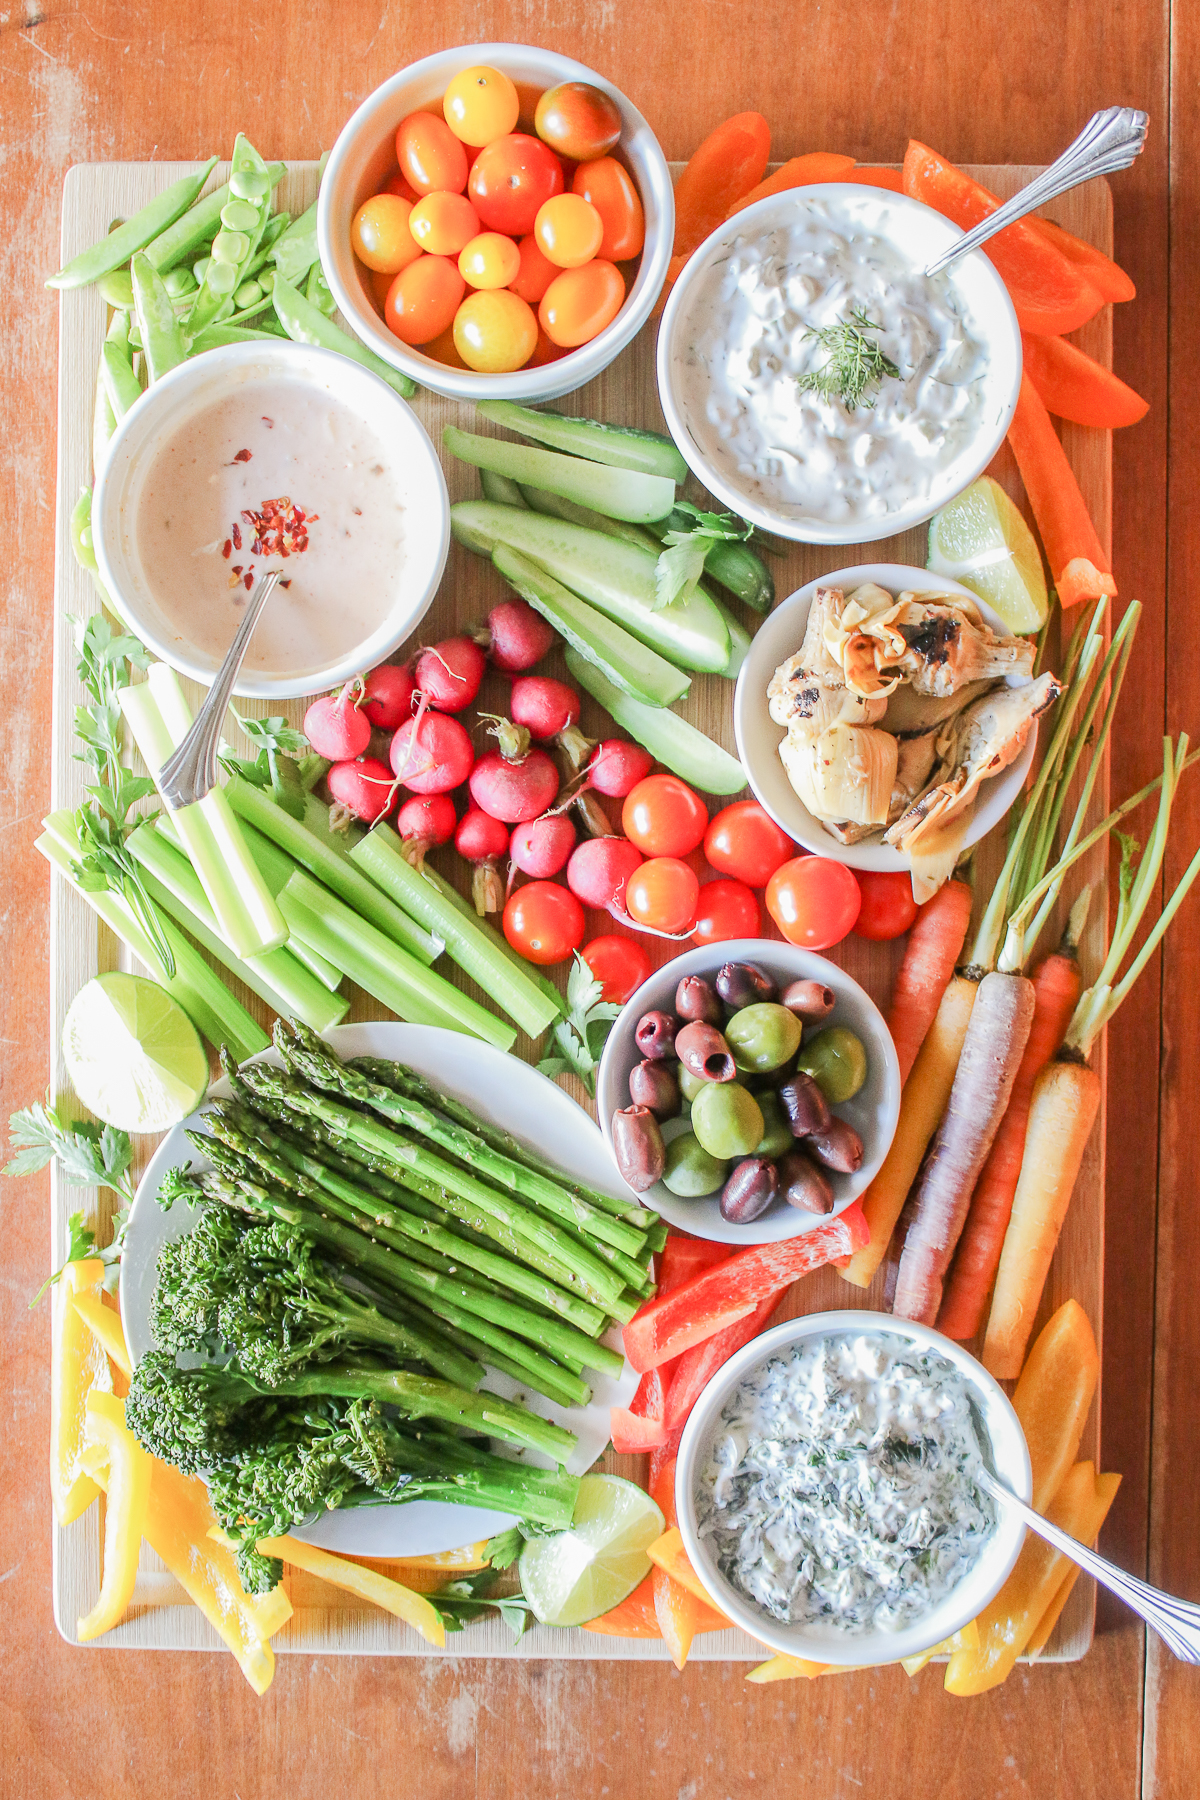 Holiday Hostess Hacks: Guide to the Ultimate Vegetables Crudites Platter by southern lifestyle blogger Stephanie Ziajka from Diary of a Debutante, pretty crudite platter, Hellmann's organic mayonnaise recipes, fresh creamy spinach dip recipe, fresh buffalo dip recipe, fresh dill dip recipe, crudite dip recipes